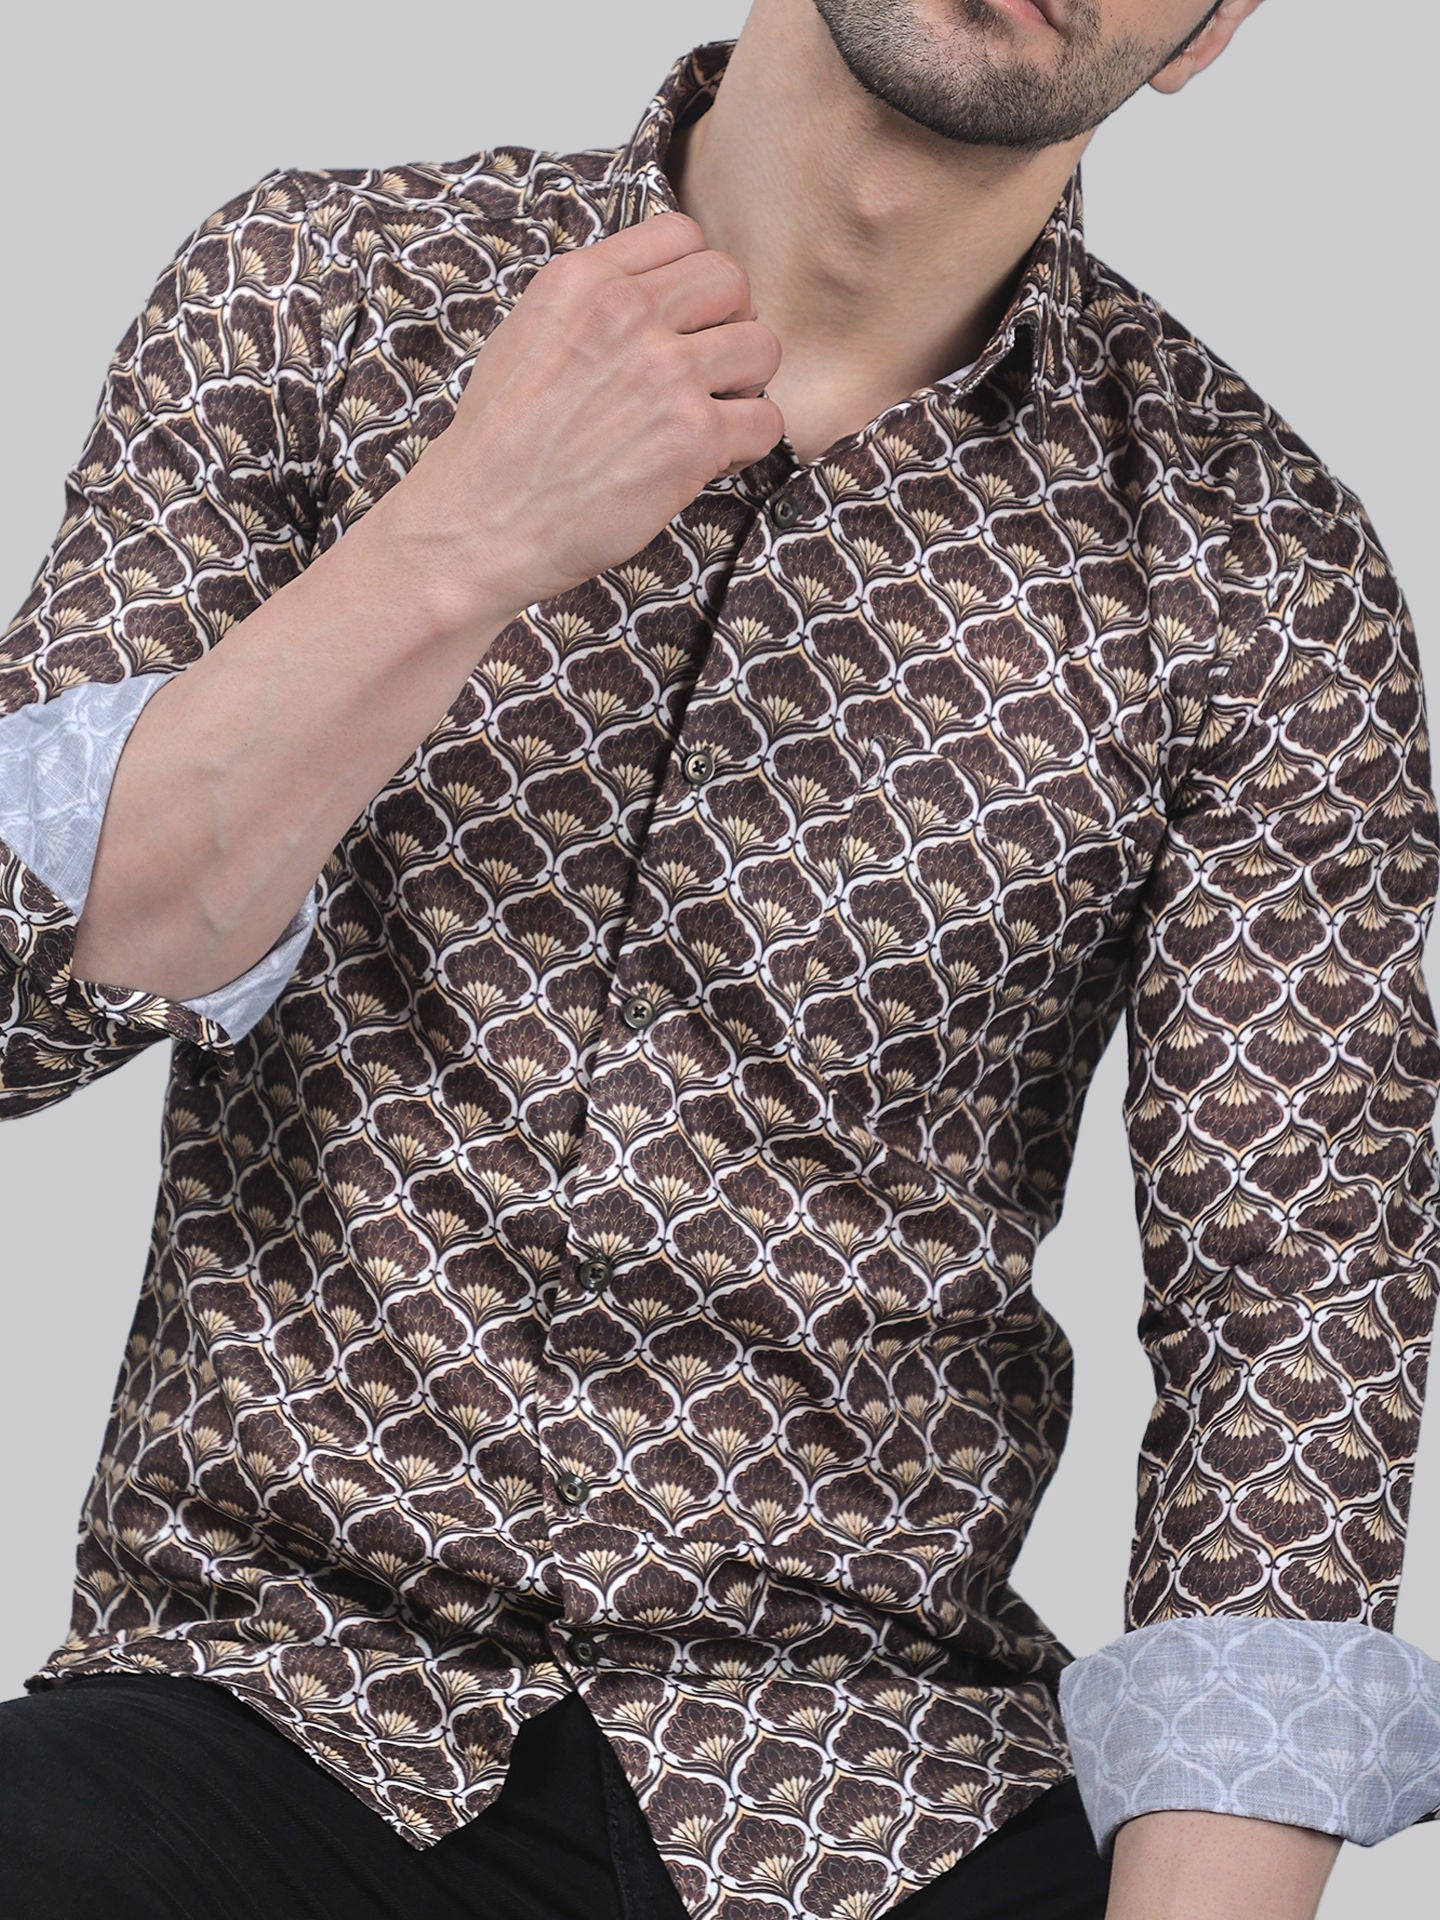 TryBuy Fancy Full Sleeve Casual Linen Printed Shirt for Men - TryBuy® USA🇺🇸